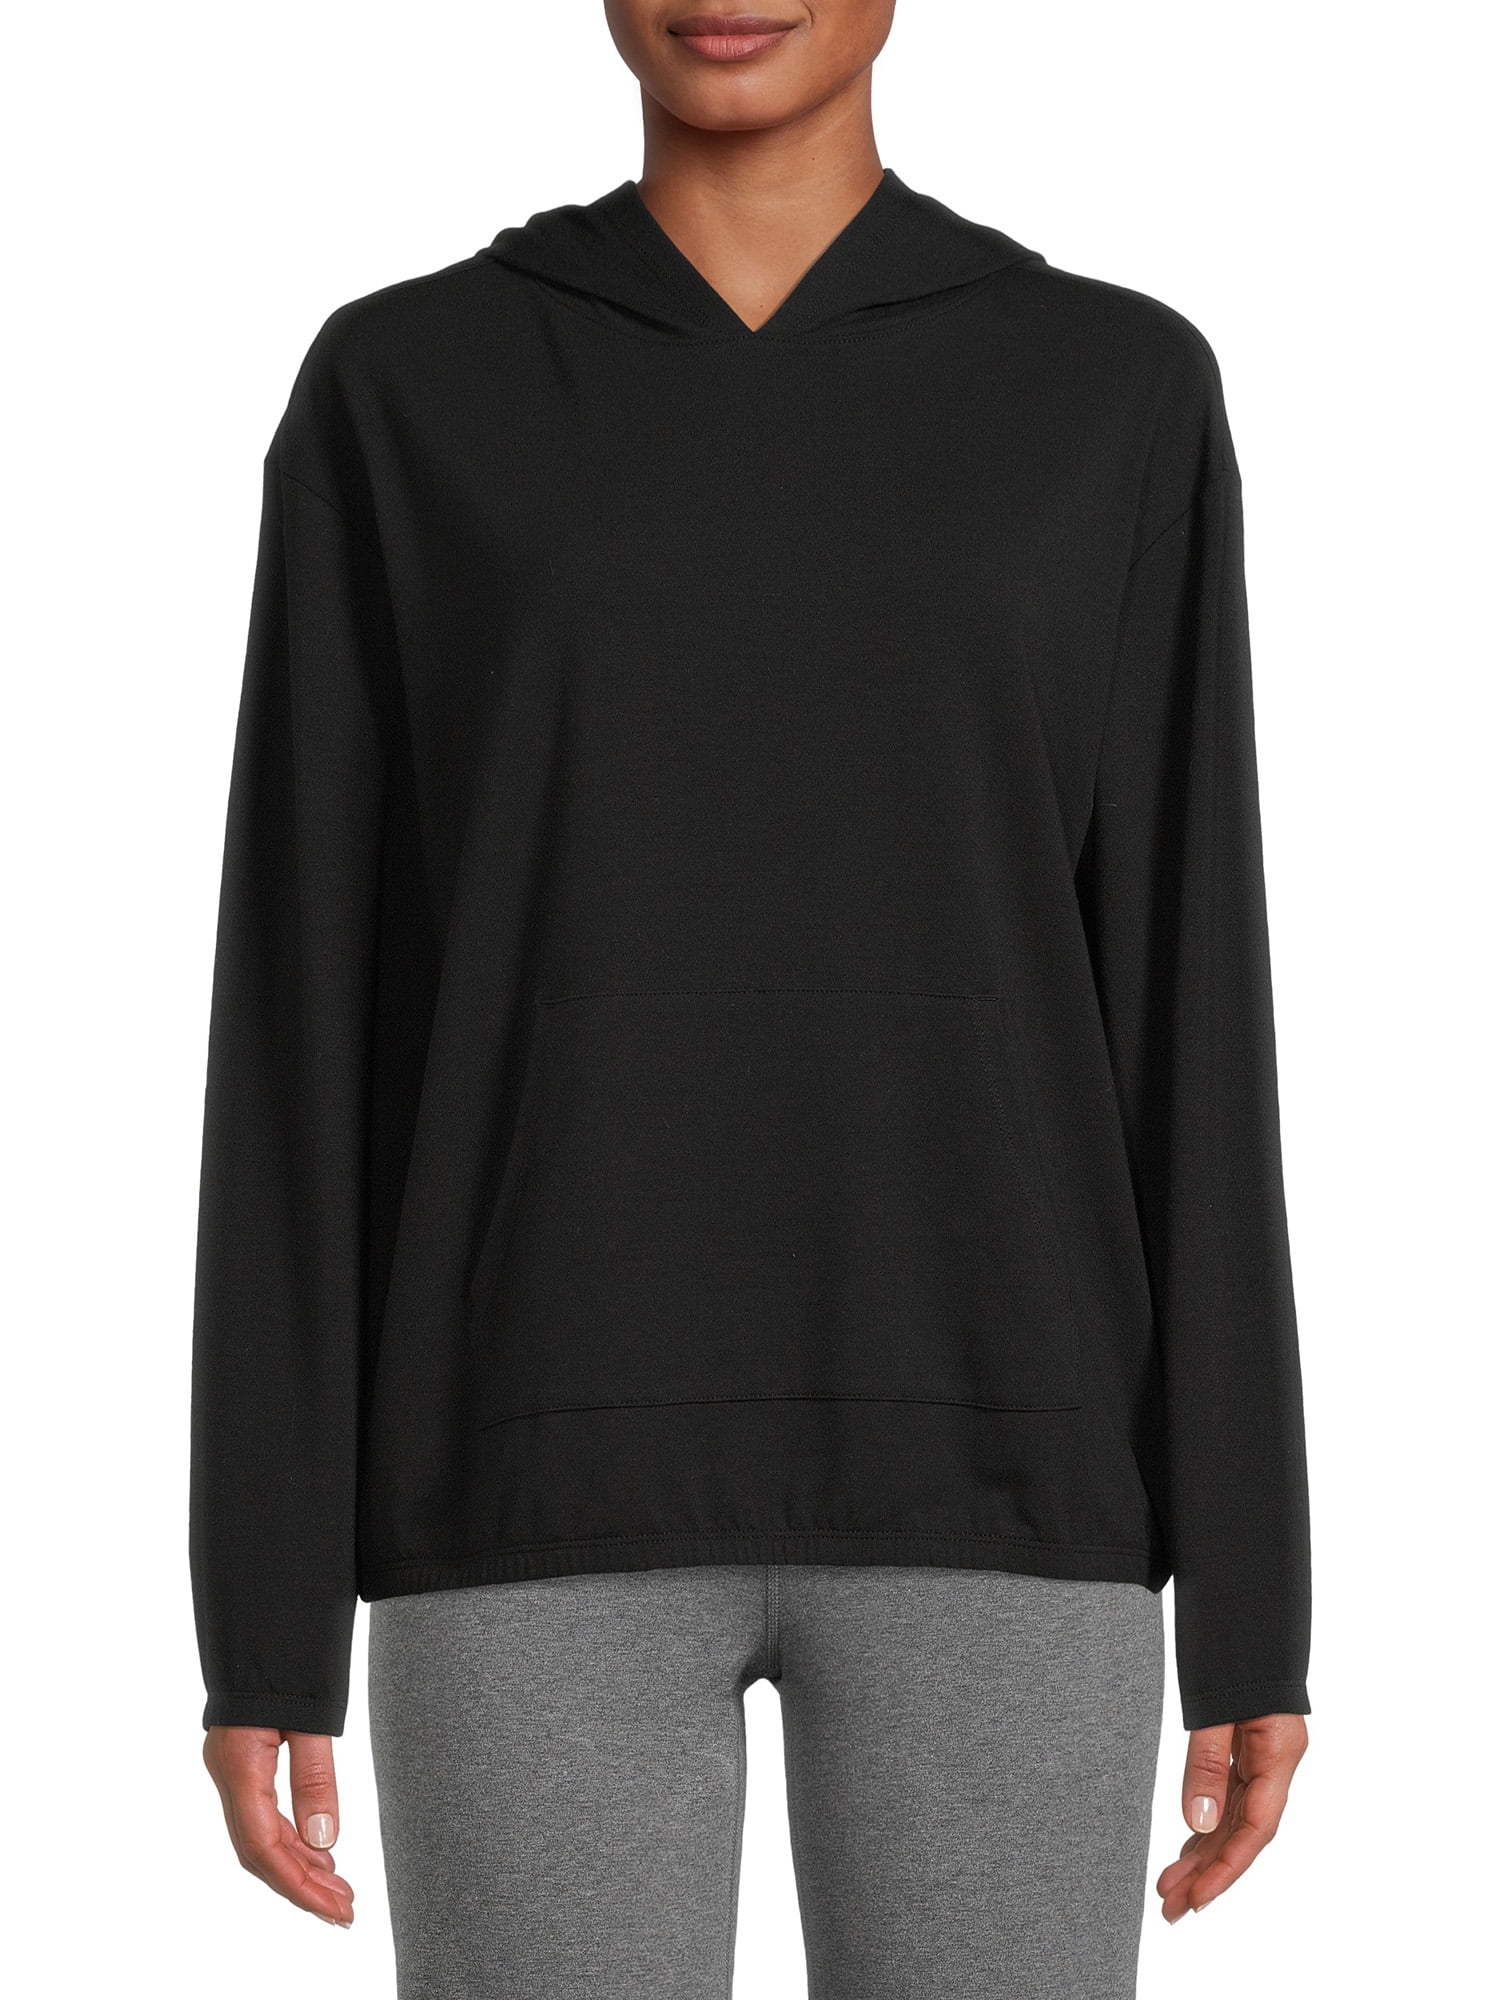 Athletic Works Women's Athleisure Knit Hooded Pullover